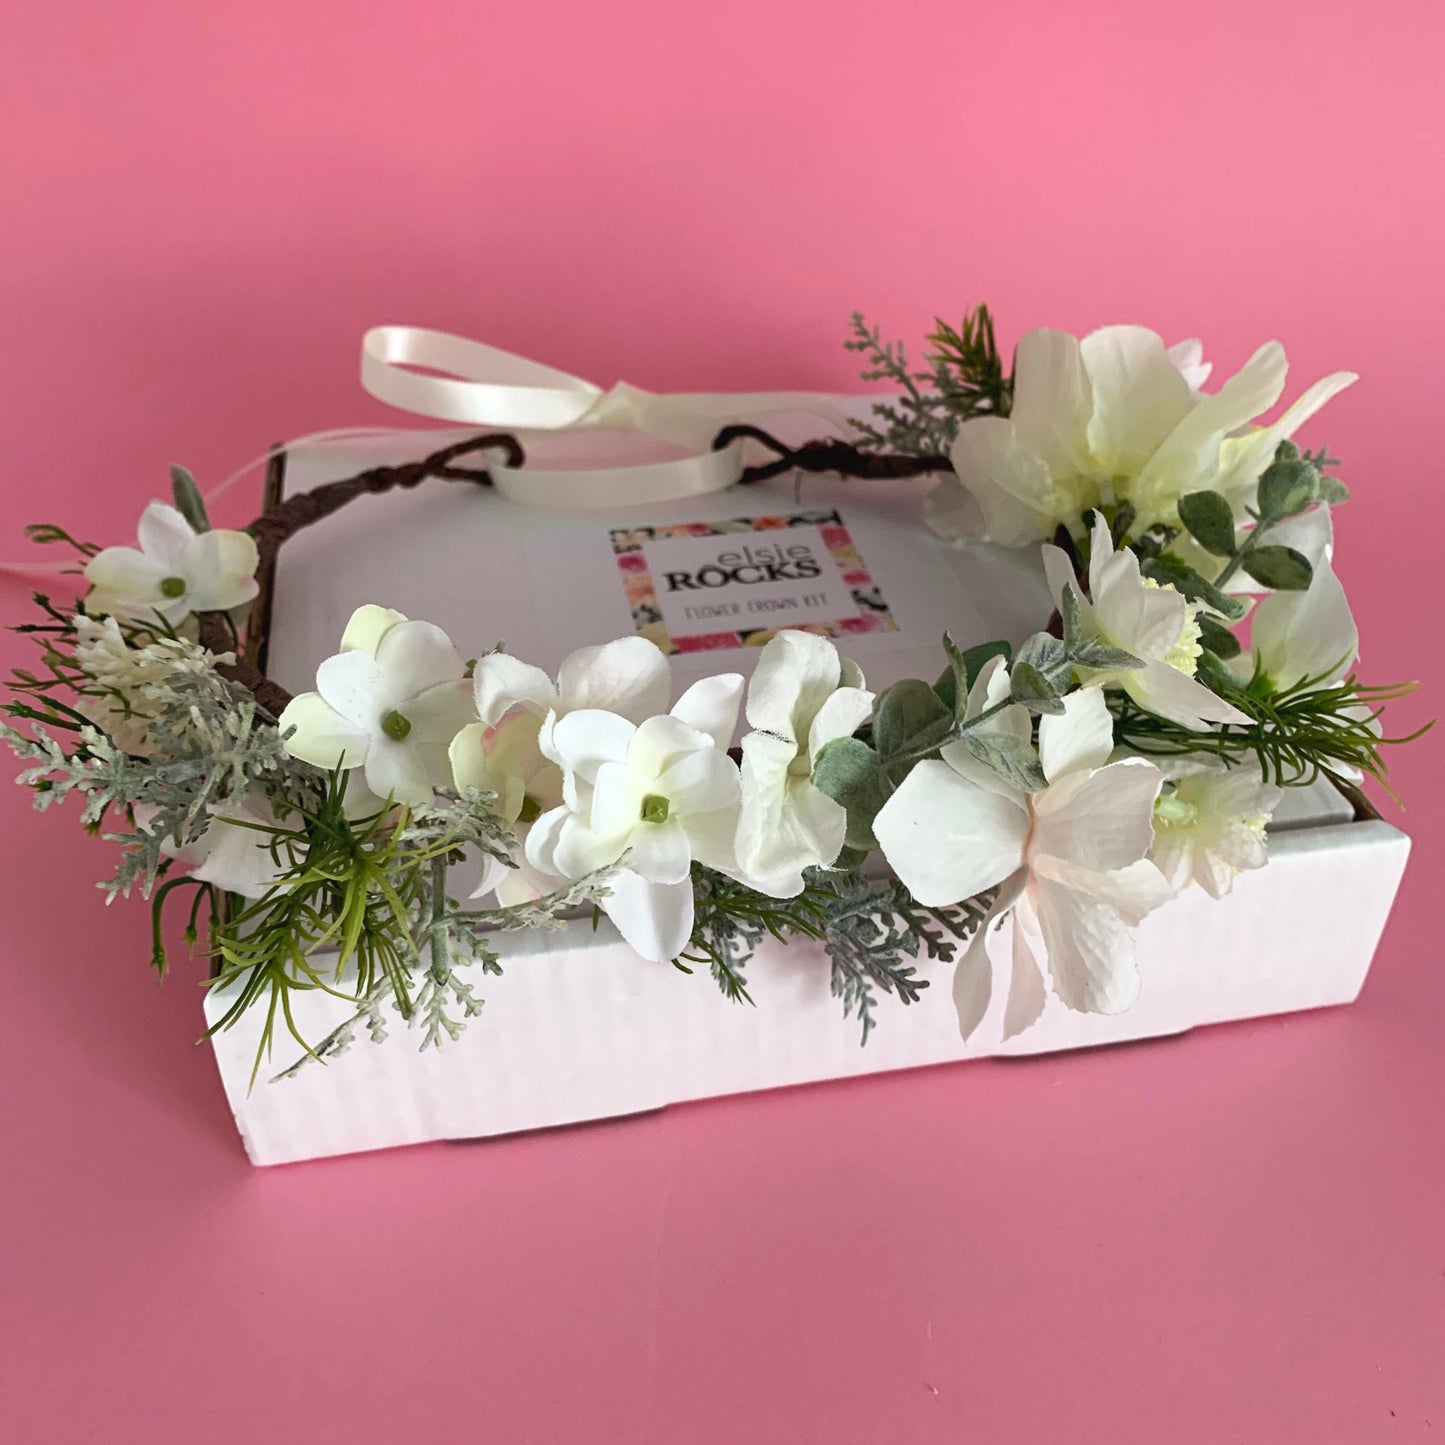 Dried Flower Crown Kit. A Make Your Own Floral Crown Kit With Instructions,   Tutorial, Flowers and More. 